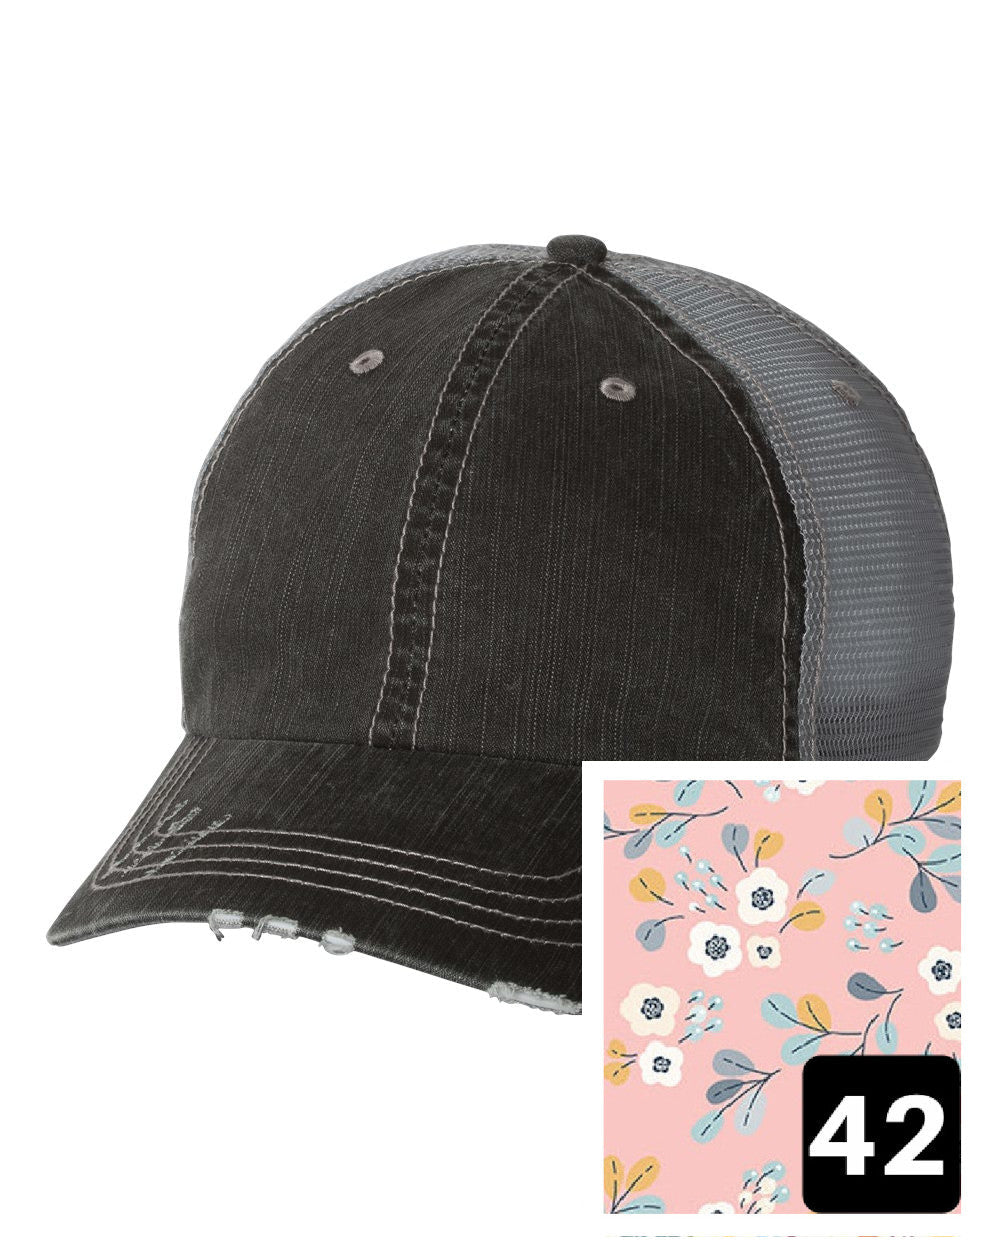 gray distressed trucker hat with light blue and pink mosaic fabric state of Pennsylvania